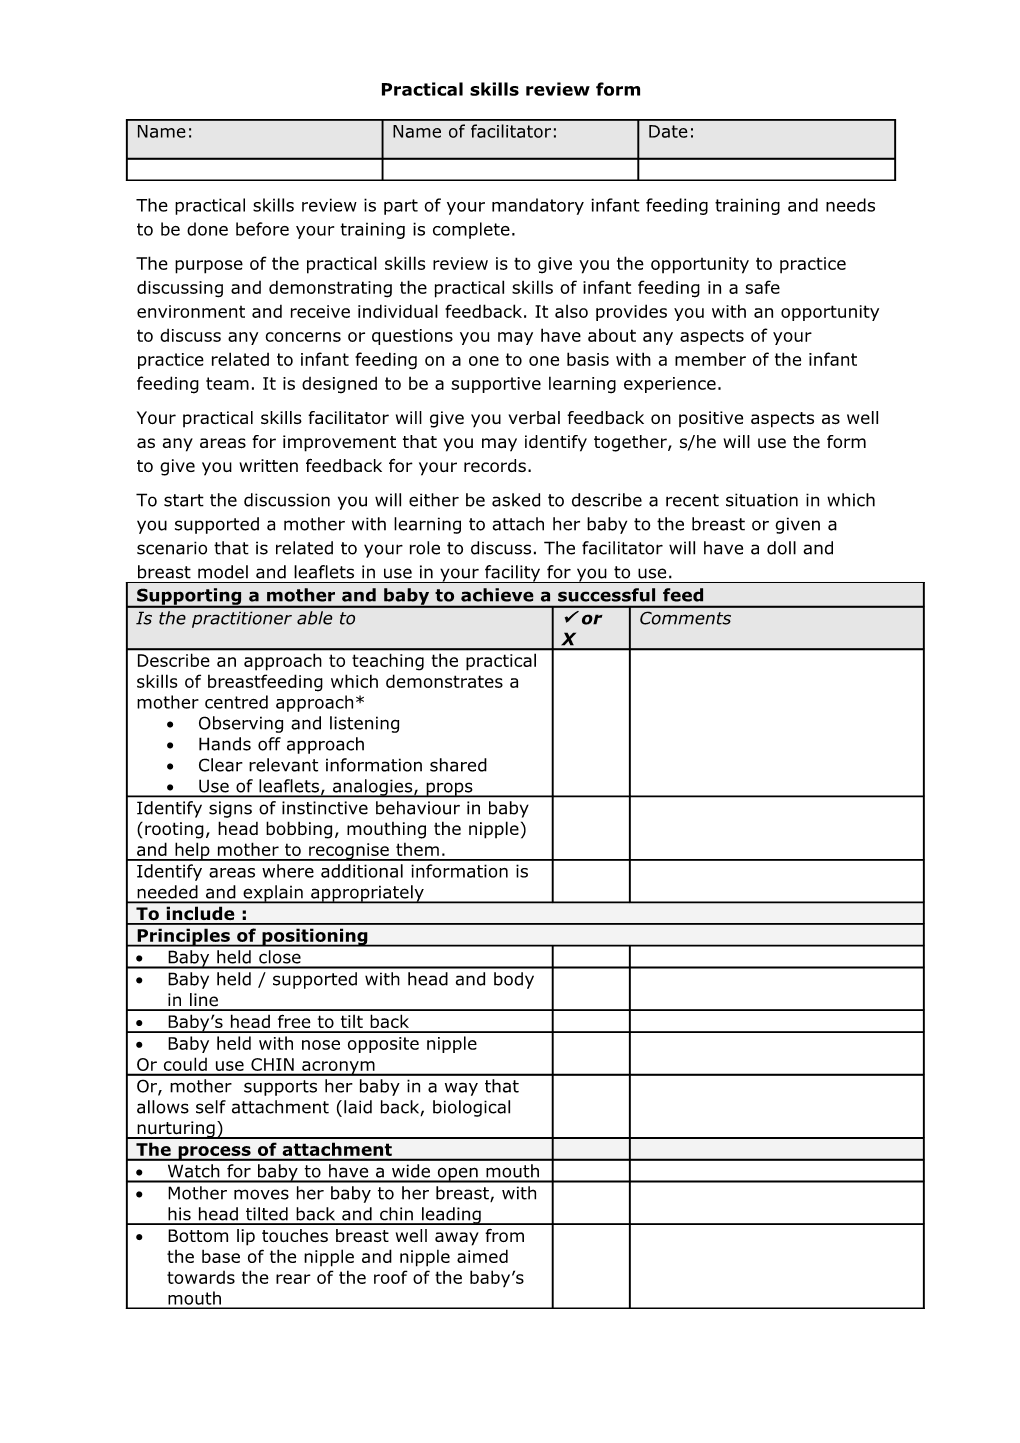 Sample Practical Skills Review Form